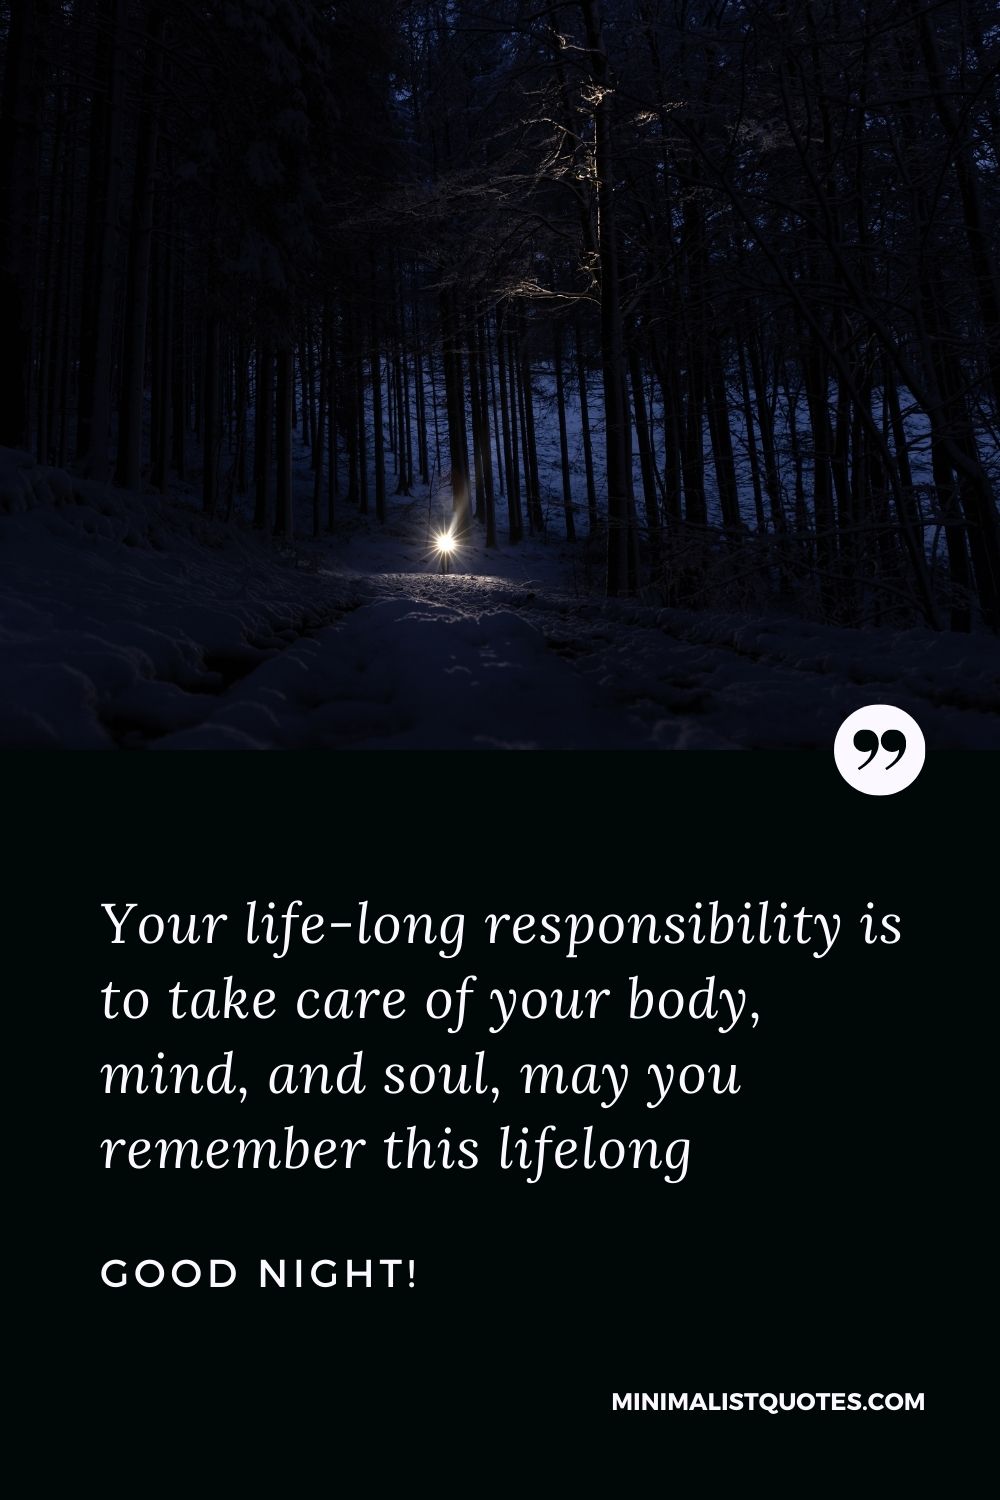 Good Night Wish & Message: Your life-long responsibility is to take care of your body, mind, and soul, may you remember this lifelong.